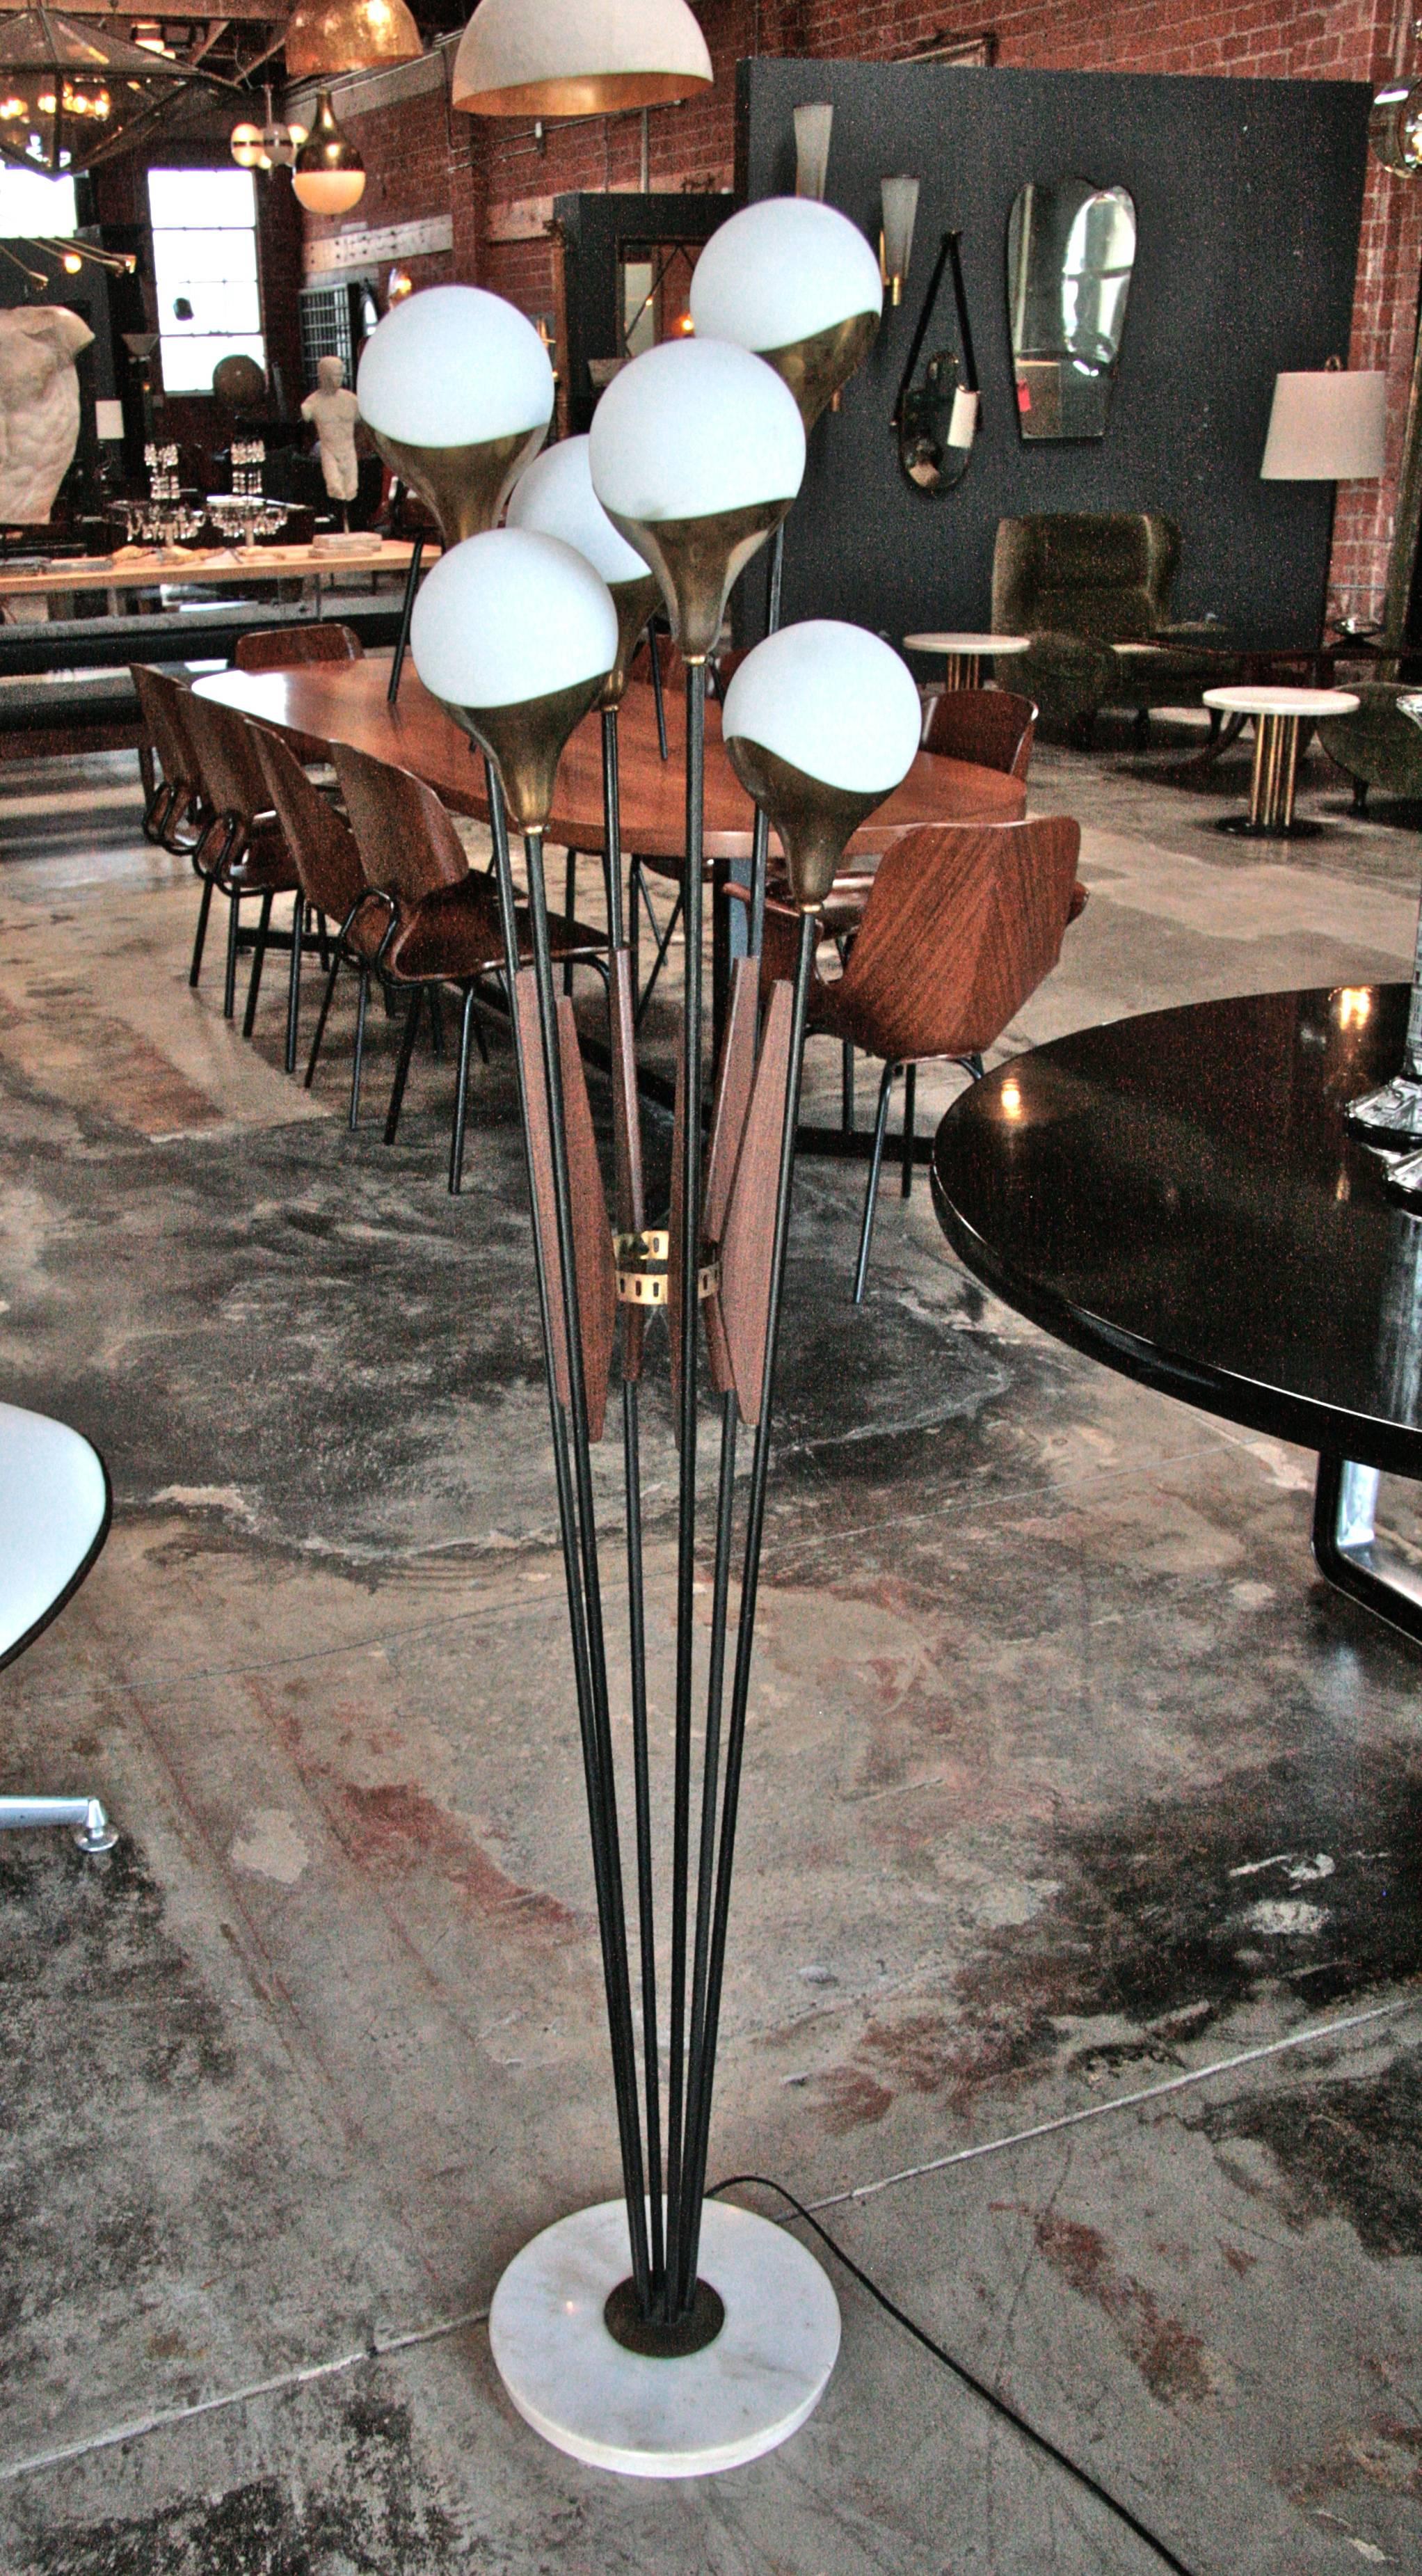 An elegant six-light floor lamp by renowned Italian production company Stilnovo. A rare model with curved brass cups holding six opaque glass diffuser with brass finial tops.